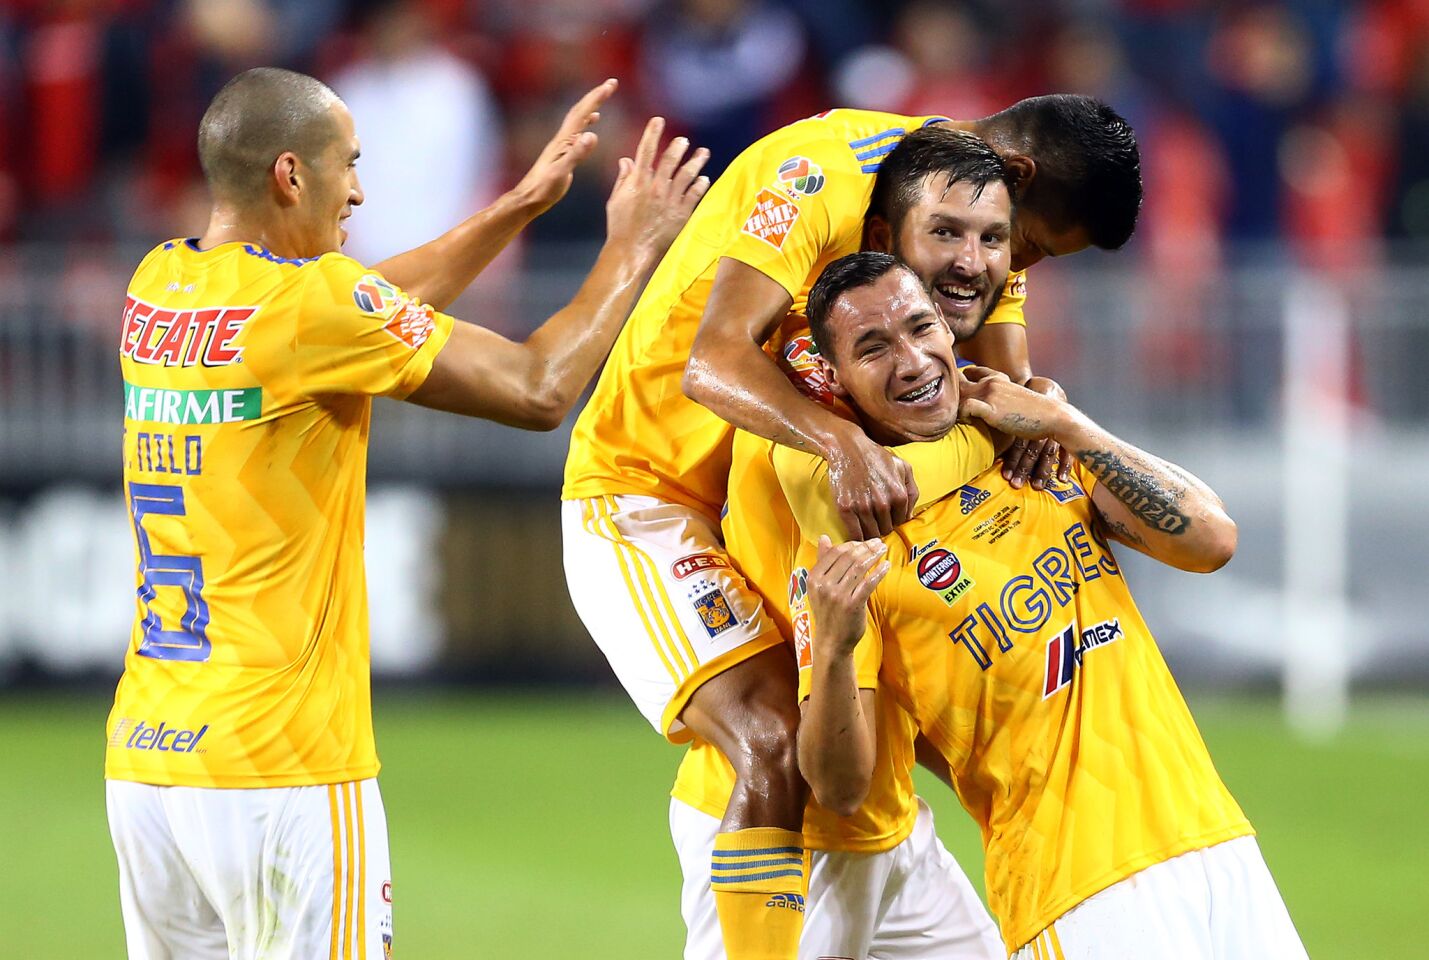 TORONTO, ON - SEPTEMBER 19: Jesús Dueñas #29 of Tigres UANL celebrates a goal with teammates during the second half of the 2018 Campeones Cup Final against Toronto FC at BMO Field on September 19, 2018 in Toronto, Canada. (Photo by Vaughn Ridley/Getty Images) ** OUTS - ELSENT, FPG, CM - OUTS * NM, PH, VA if sourced by CT, LA or MoD **